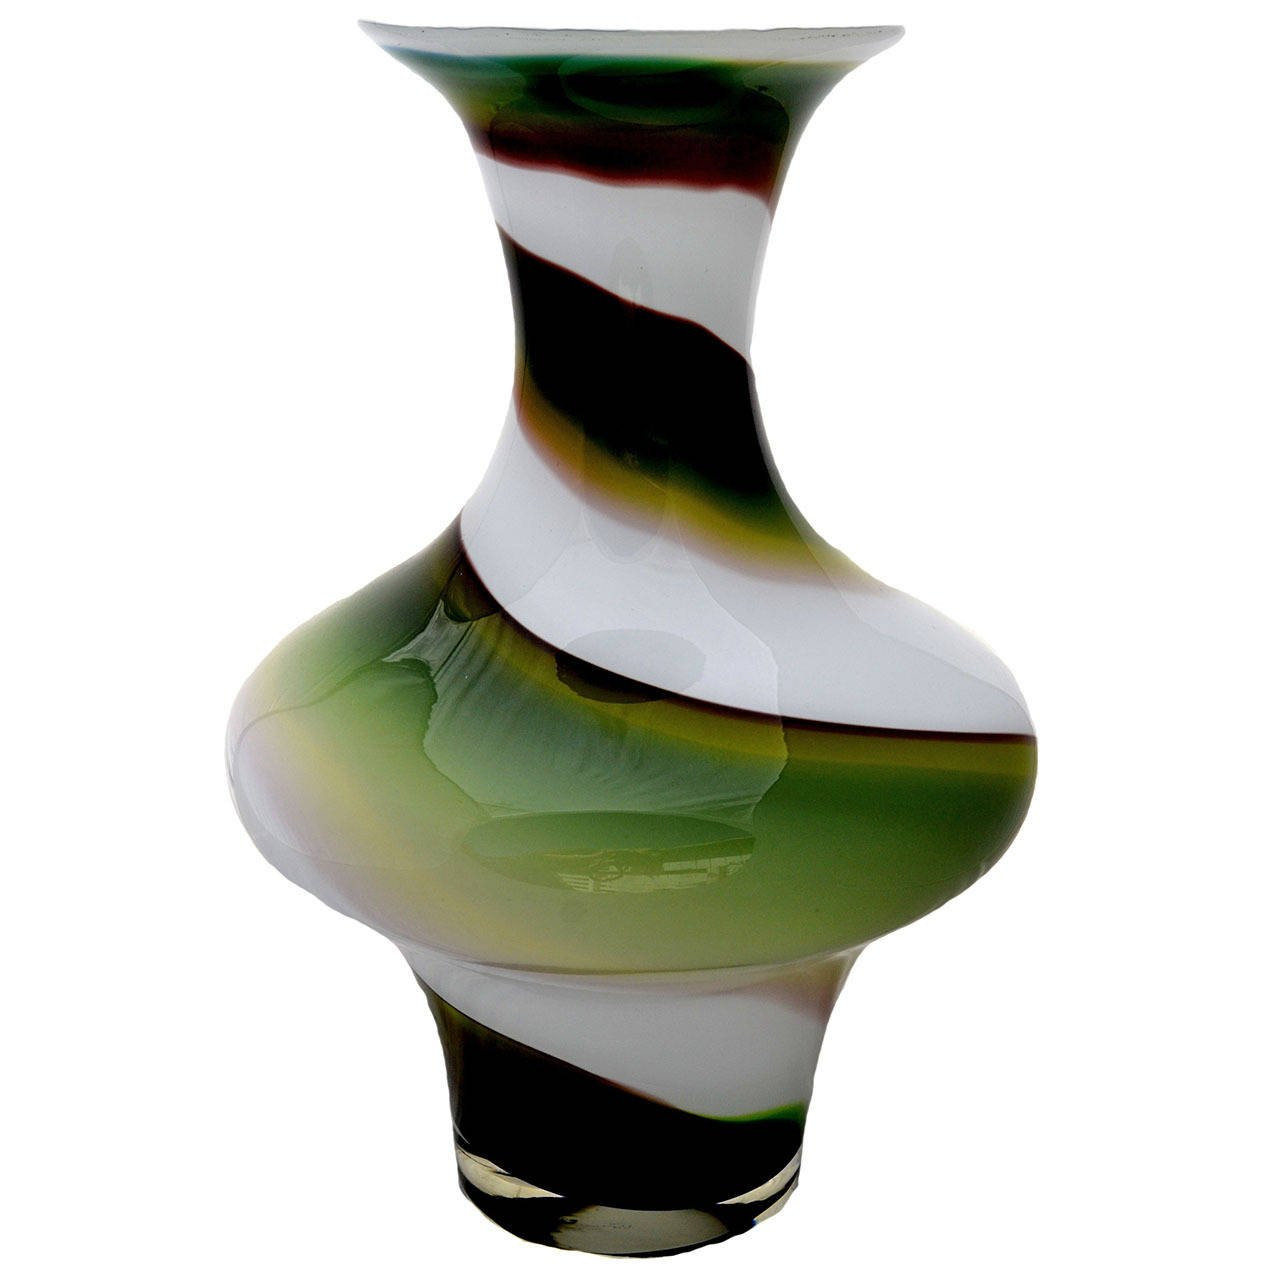 15 Cute Modern Art Glass Vase 2024 free download modern art glass vase of large and heavy 1970s german emerald green bubble ice glass vase for large green and white swirl art glass vase